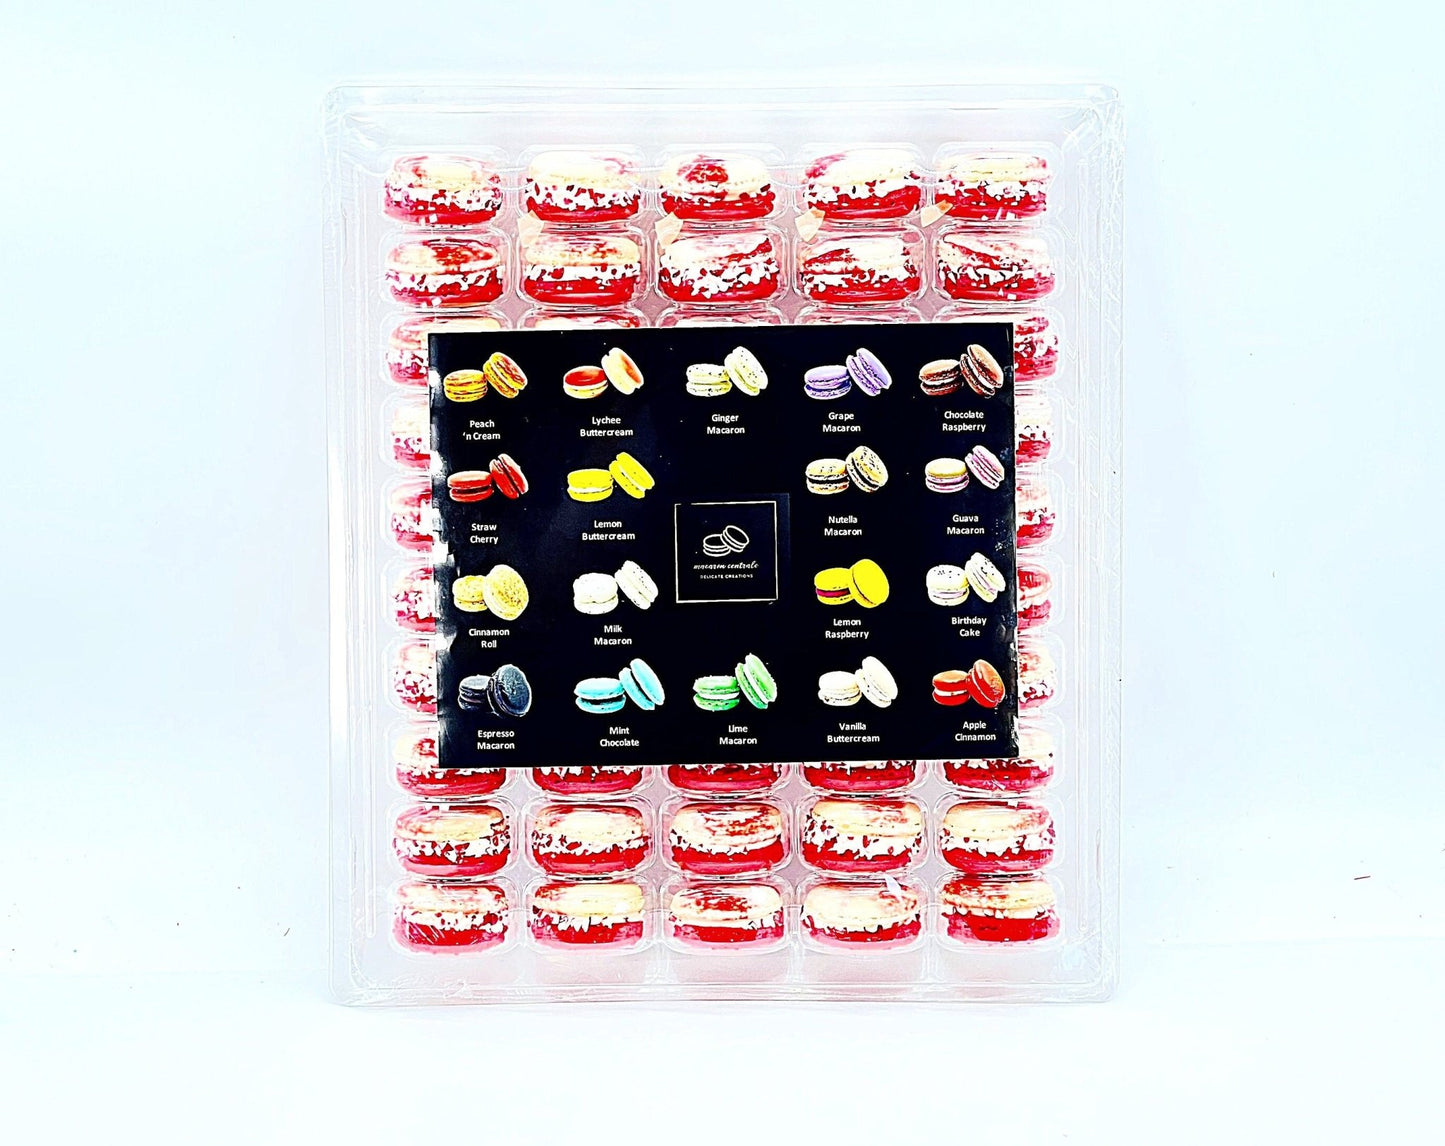 50 Pack Candy CaneFrench Macaron Value Pack - Macaron Centrale